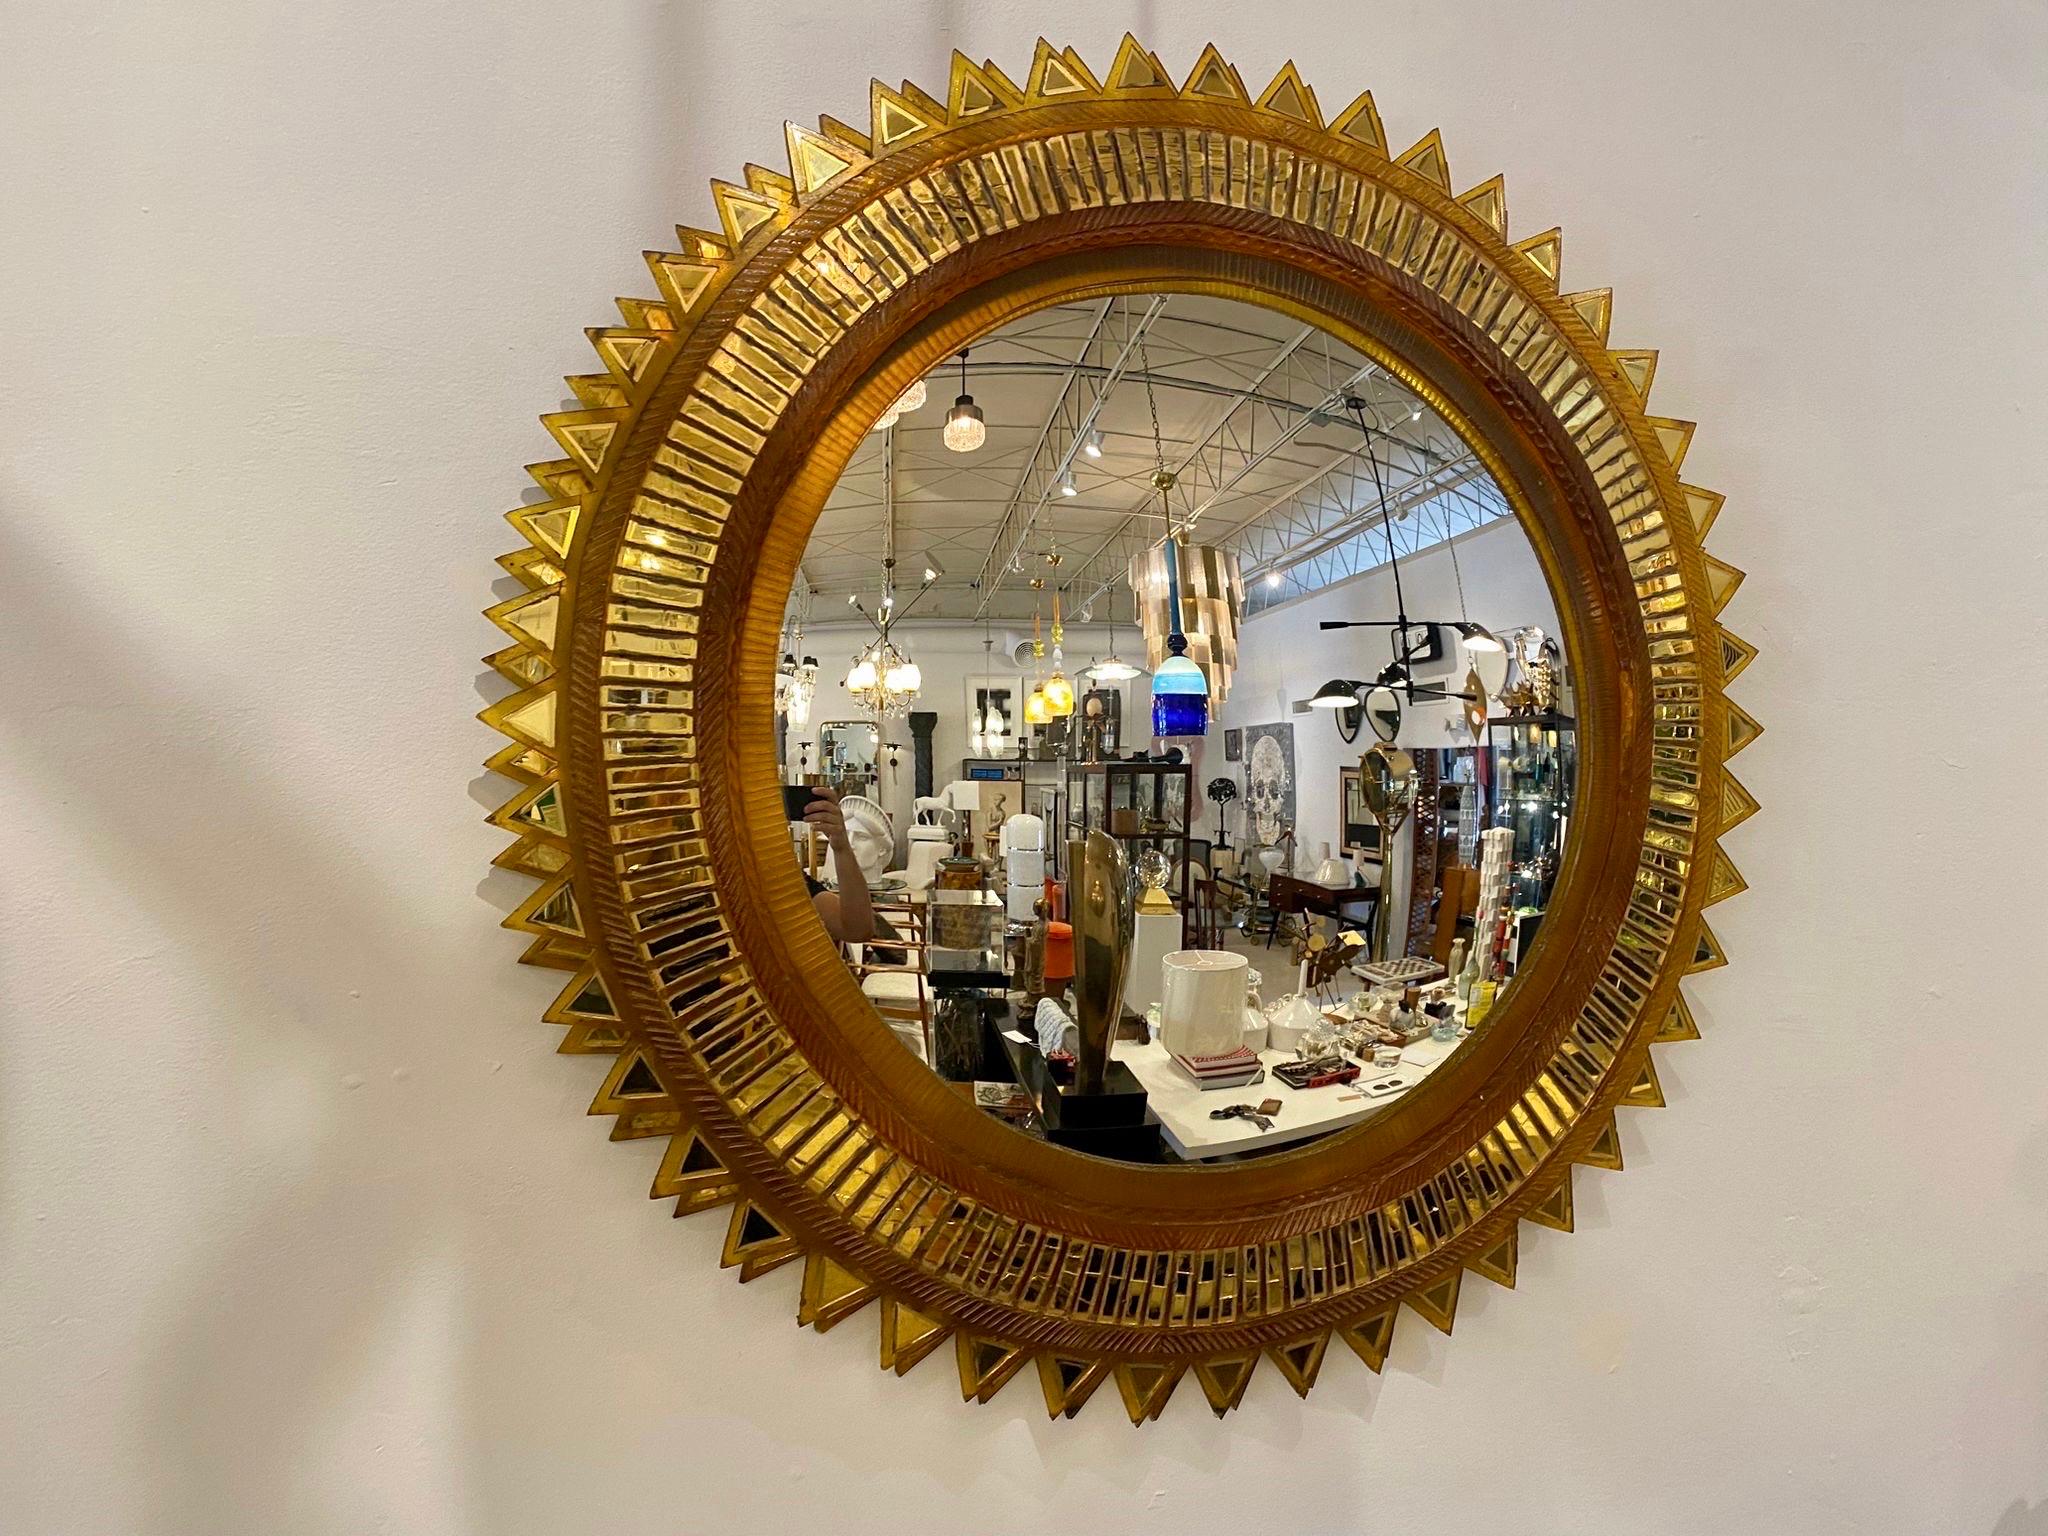 ZAJAC AND CALLAHAN Convex sunburst mirror, USA, second half of the 20th C.; Resin, Talosel, mirrored glass; Unmarked; Measures 43 inches in diameter (central convex mirror measures 27 inches in diameter). Provenance: Property from the Estate of